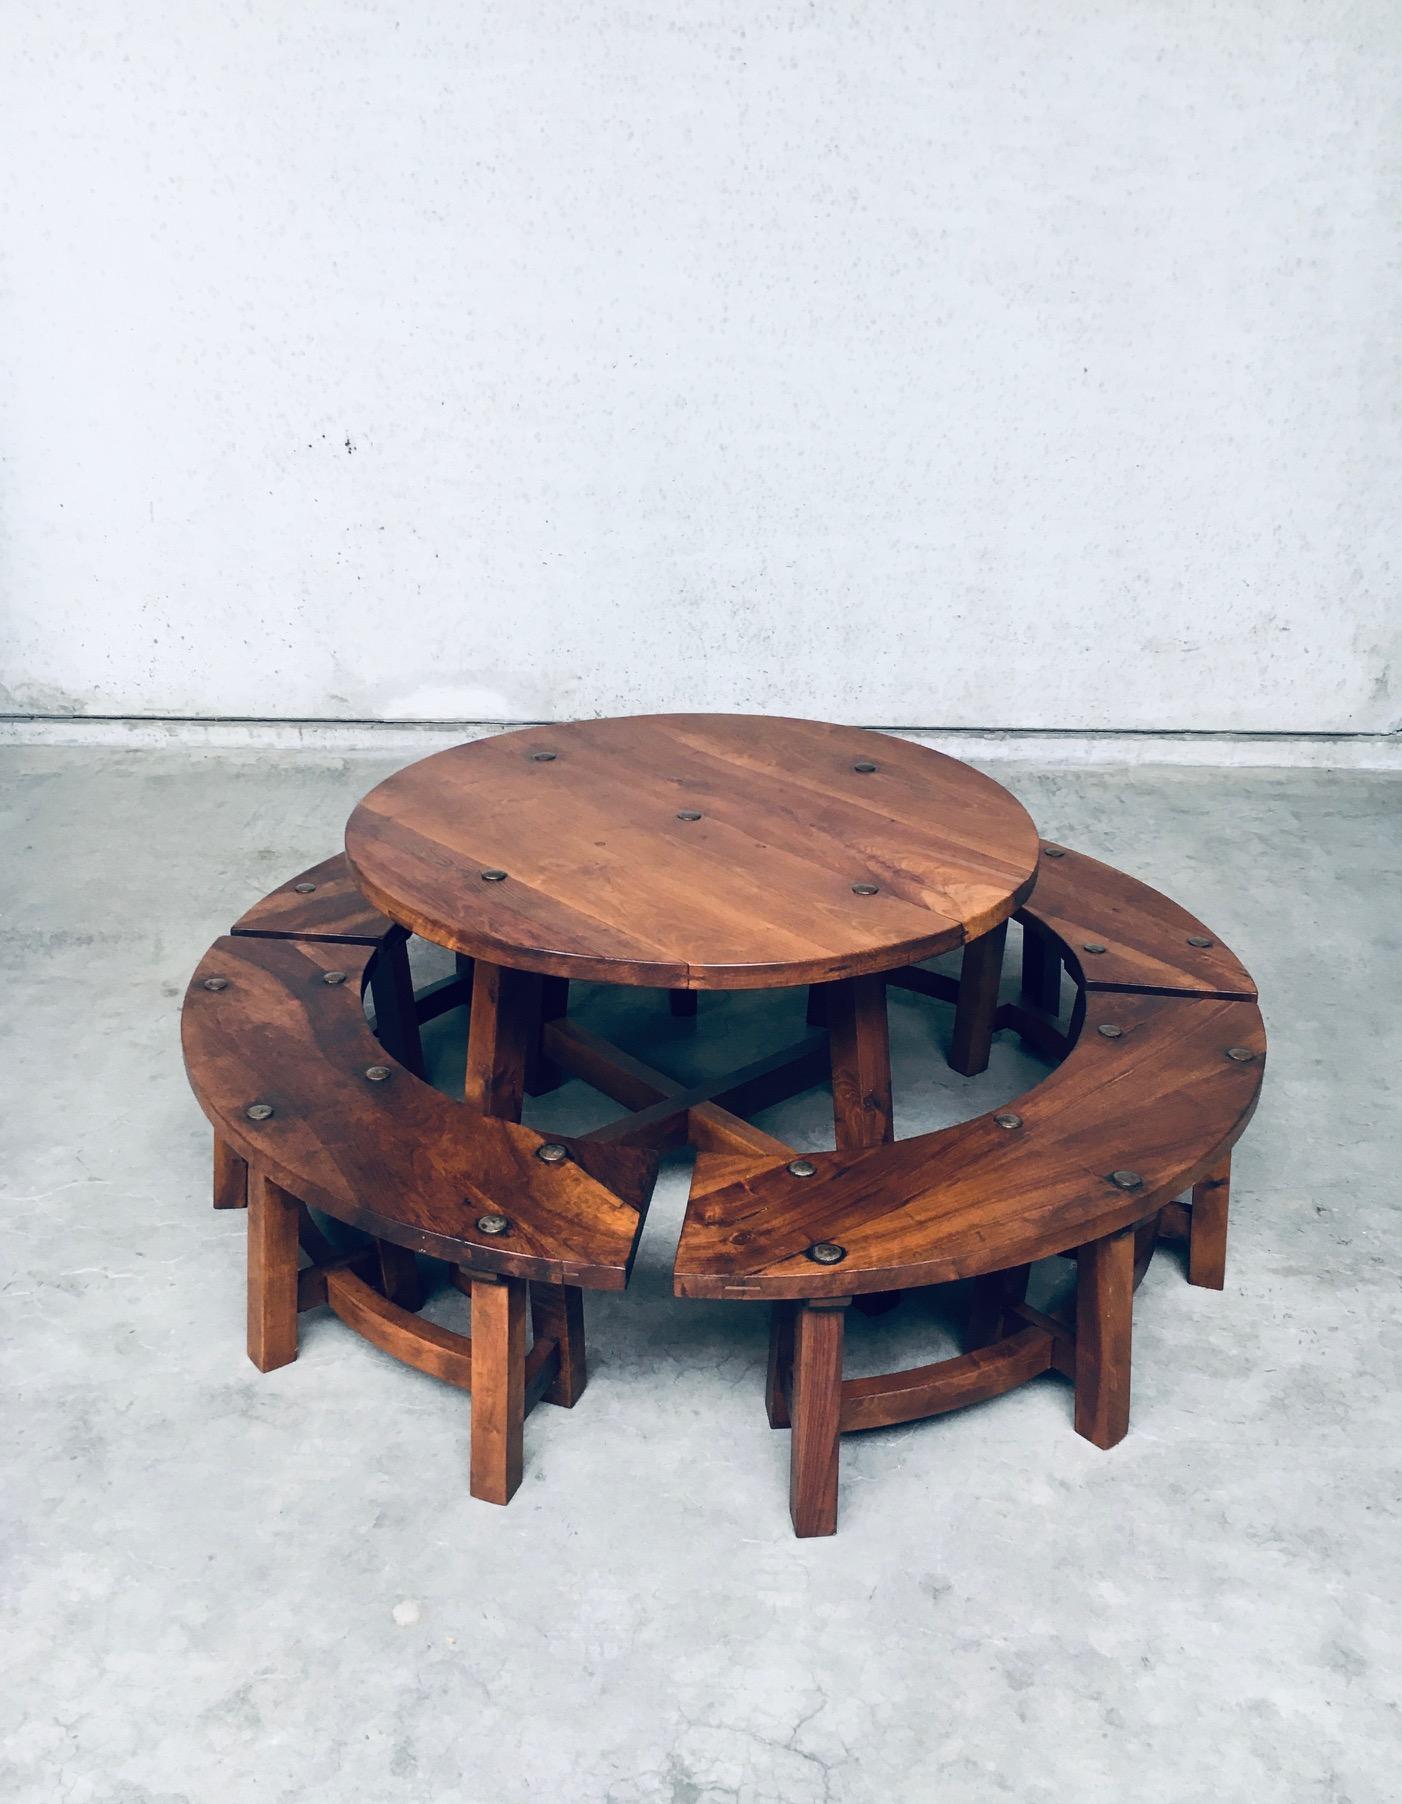 French Provincial Midcentury French Alps Chalet Style Round Table & 4 Benches, France 1950's